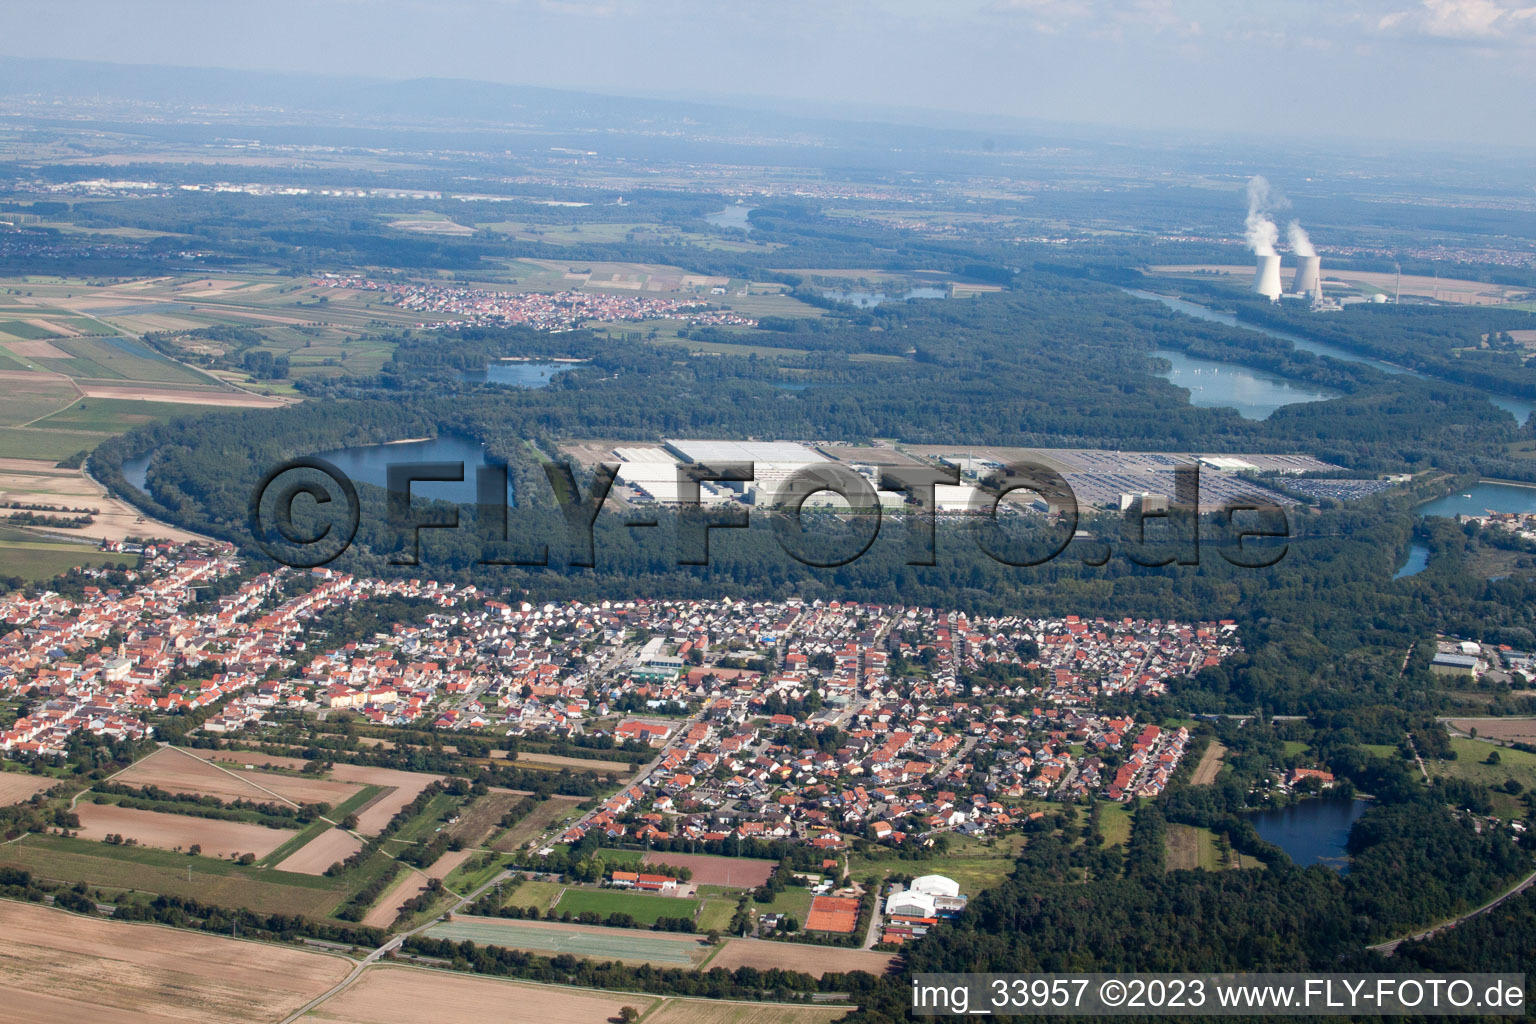 Aerial photograpy of Daimler GLC on the island of Green in Germersheim in the state Rhineland-Palatinate, Germany